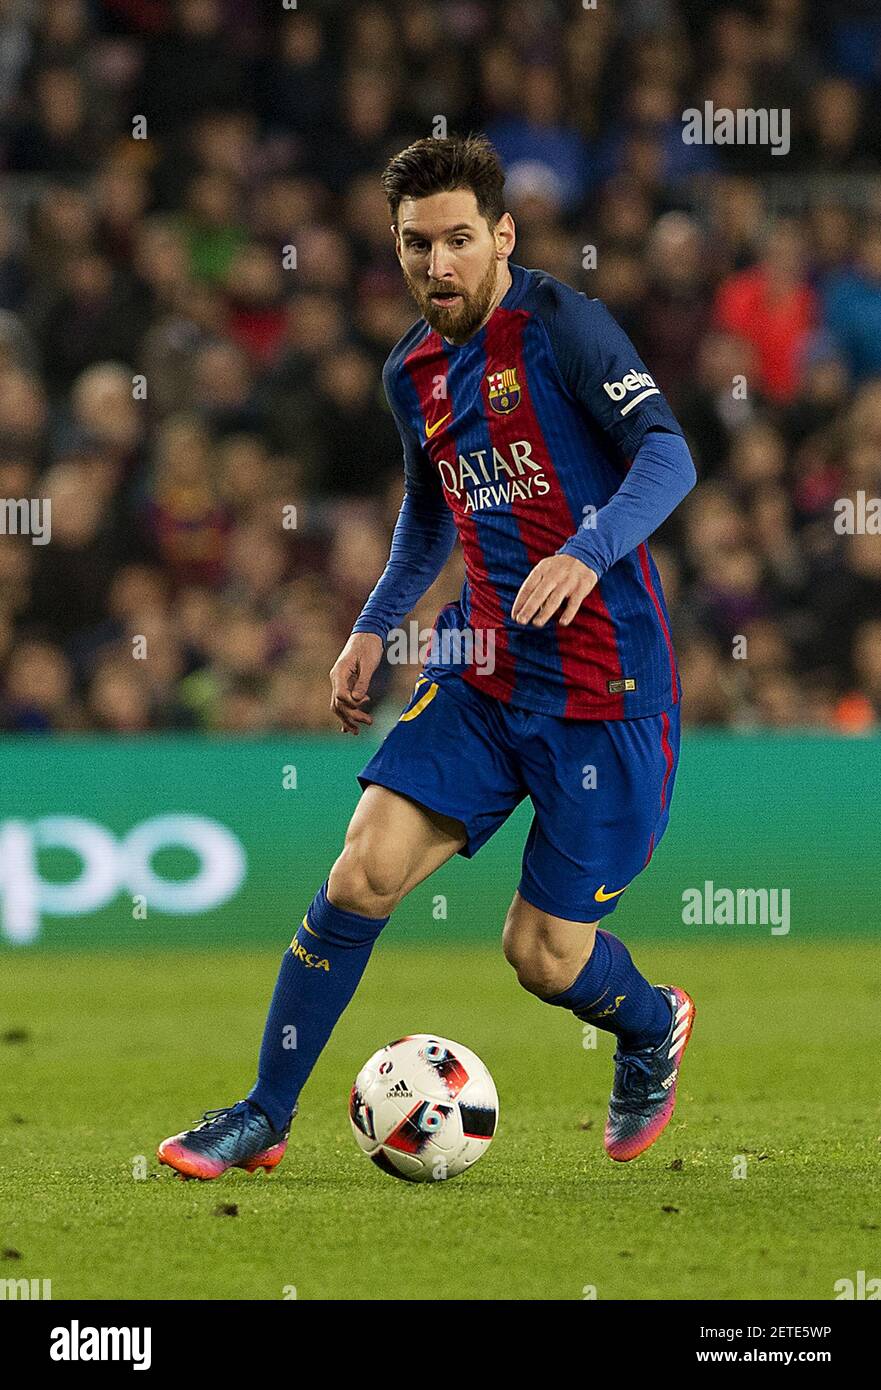 Barcelona's Lionel Messi vies the ball during the King Cup semi final  second leg football match, between Barcelona and Atletico de Madrid at the  Camp Nou stadium in Barcelona. Spain, Feb. 7,